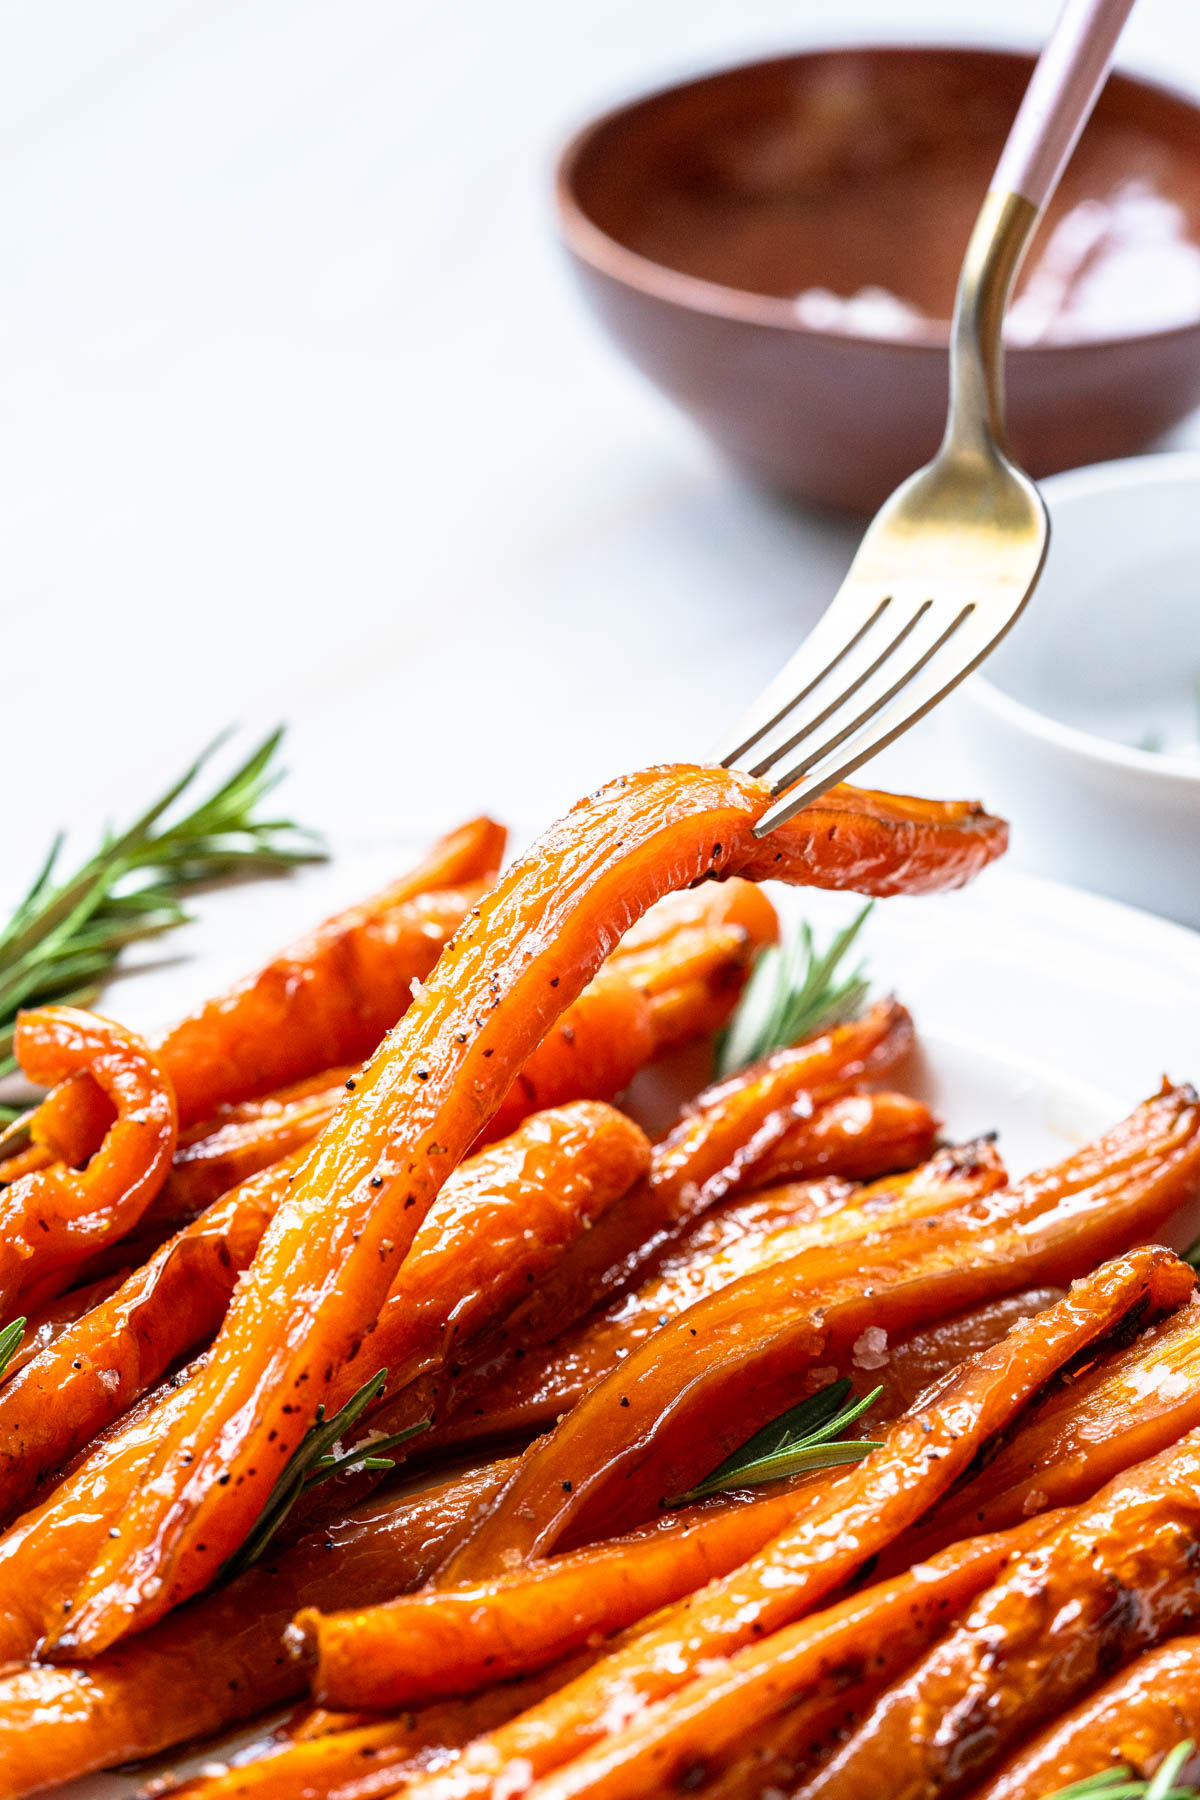 Roasted carrots on a plate with a fork.